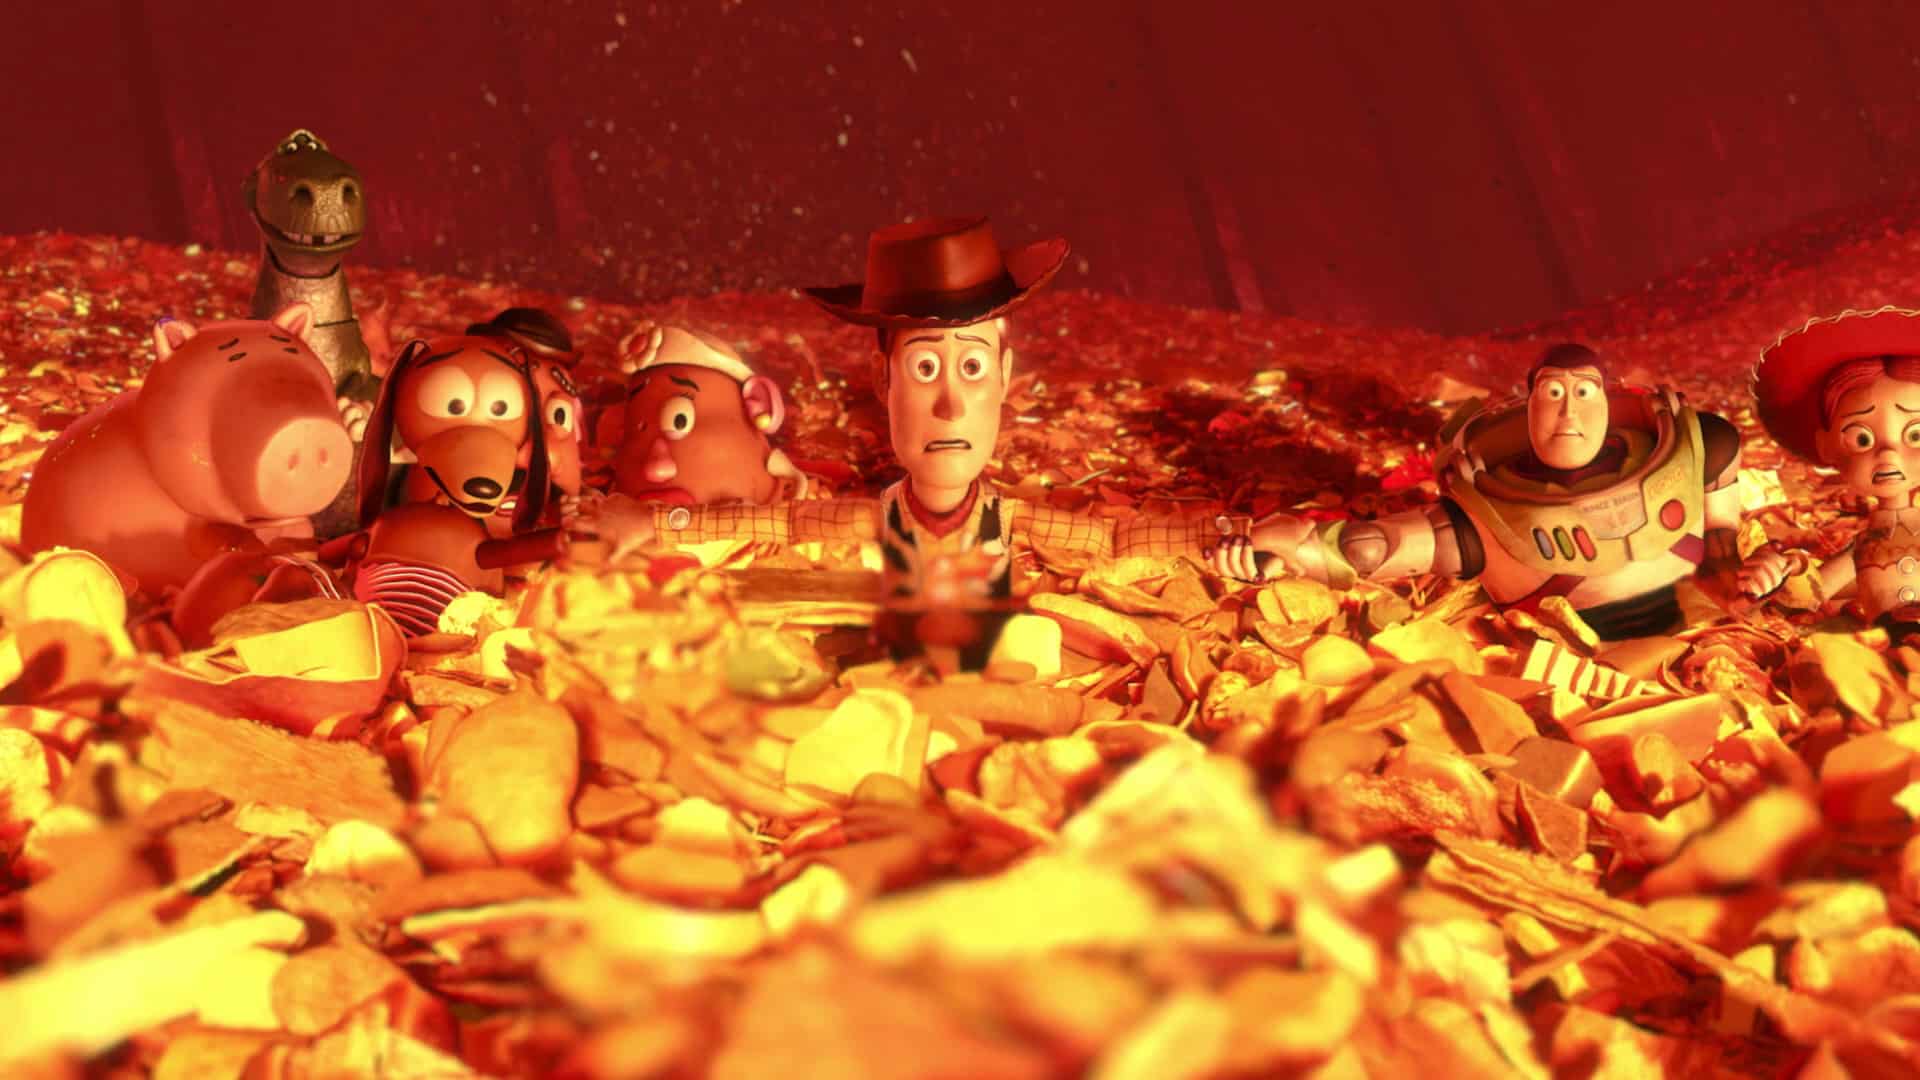 The toys in Disney Pixar's Toy Story 3 in the furnace scene at the end of the film.